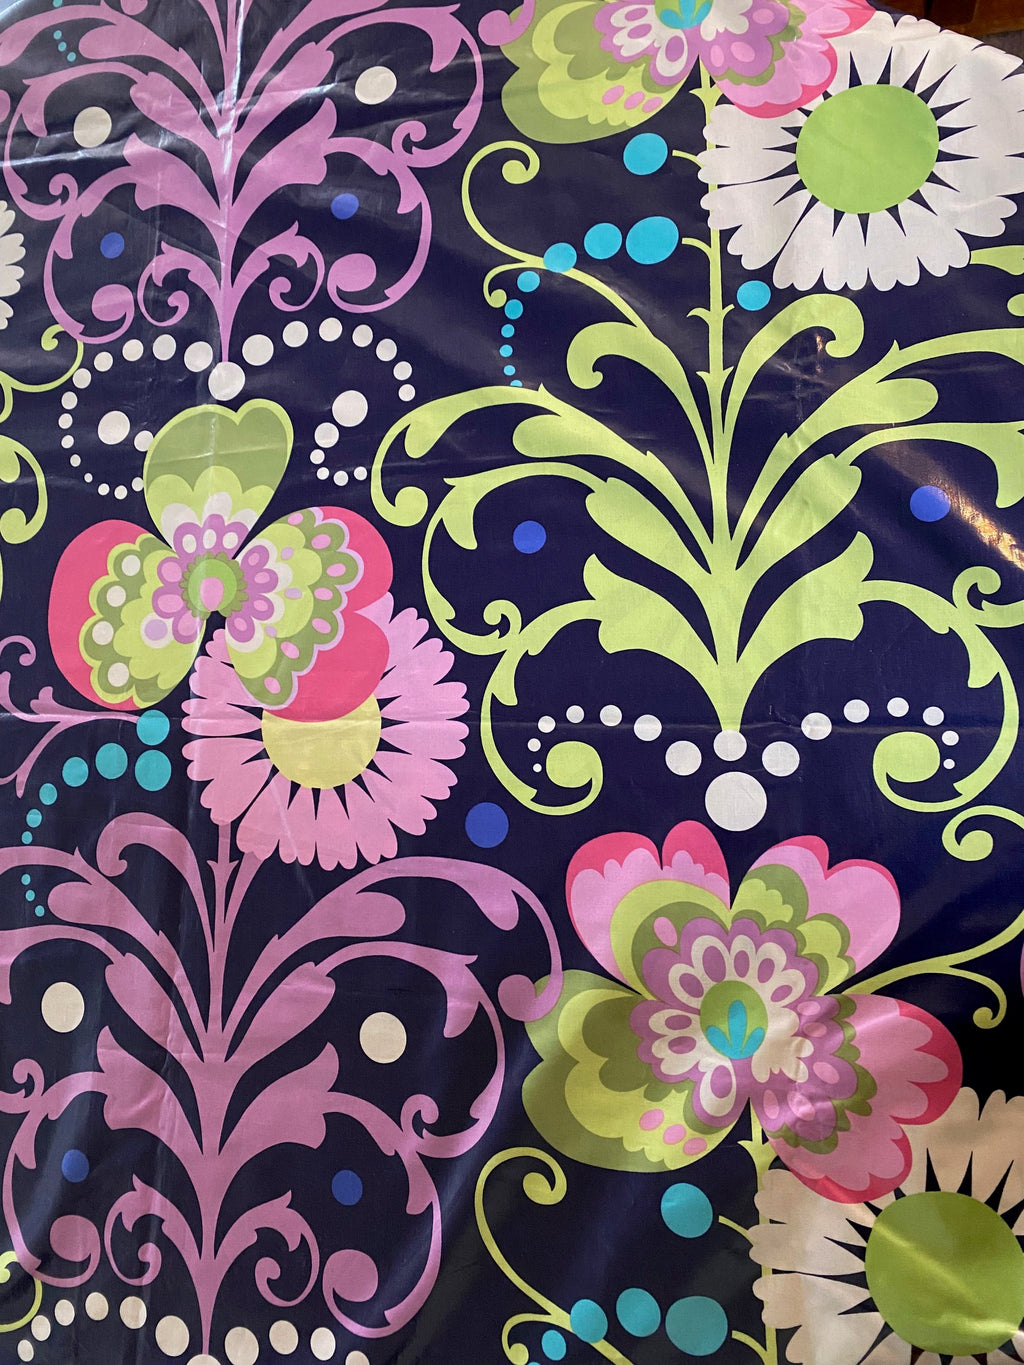 Gorgeous Laminated "Paradise Garden" Fabric by Amy Butler- Cook Street Vintage